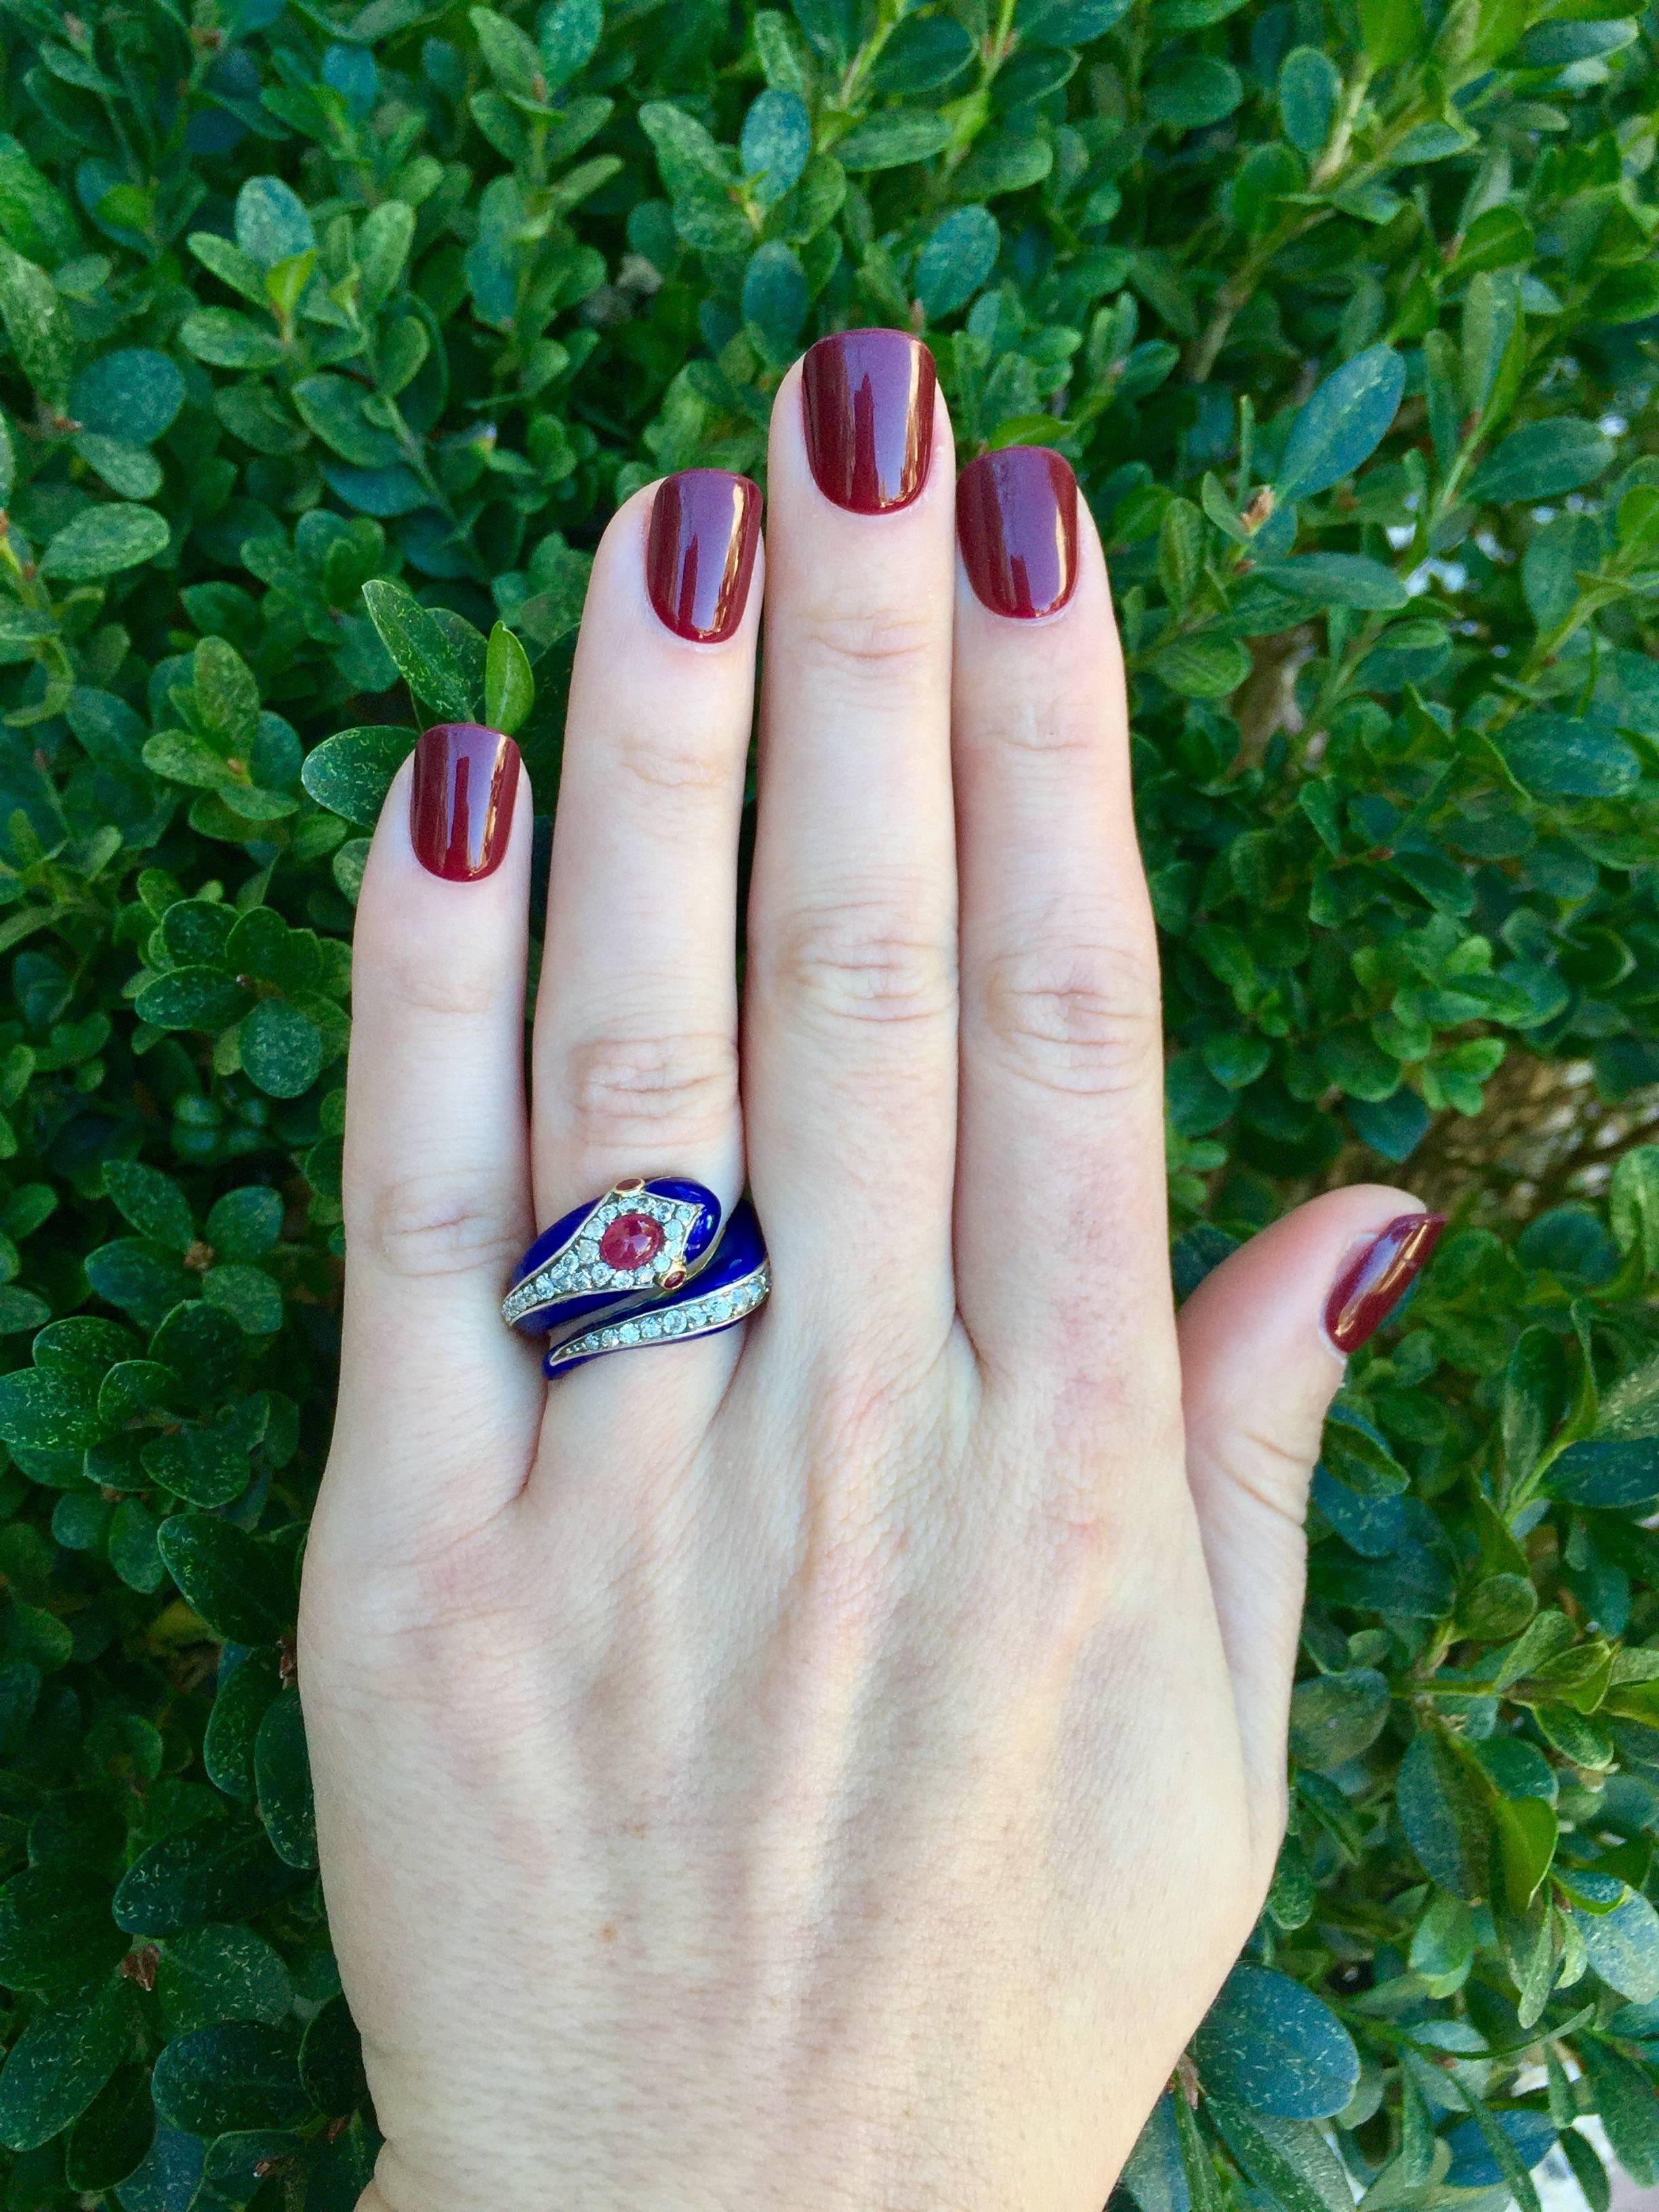 This vintage 18 karat yellow gold and platinum snake ring has beautiful dark blue enamel on its body.  37 old cut diamonds are set around the curved body, totaling approximately 1 carat in diamond weight.  A ruby cabochon is set on the snake head